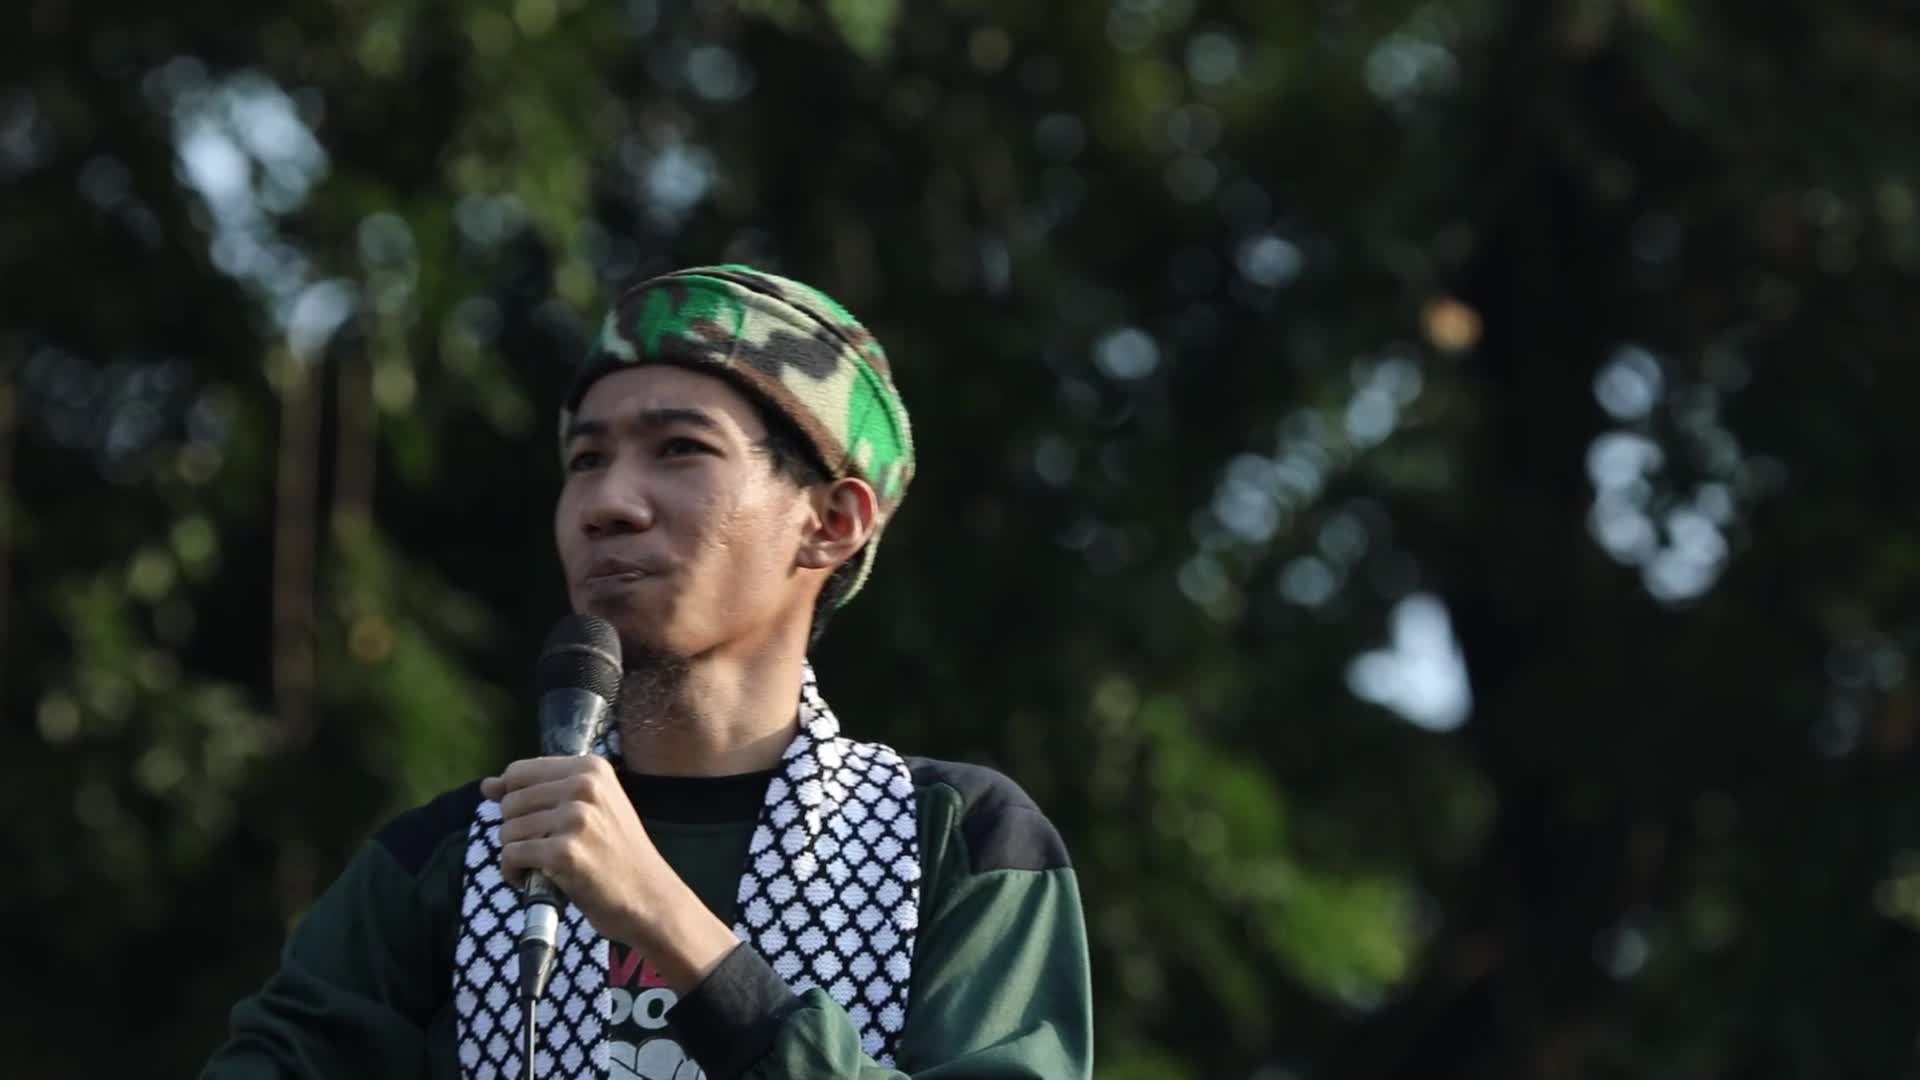 Pro Palestine rally in Indonesia